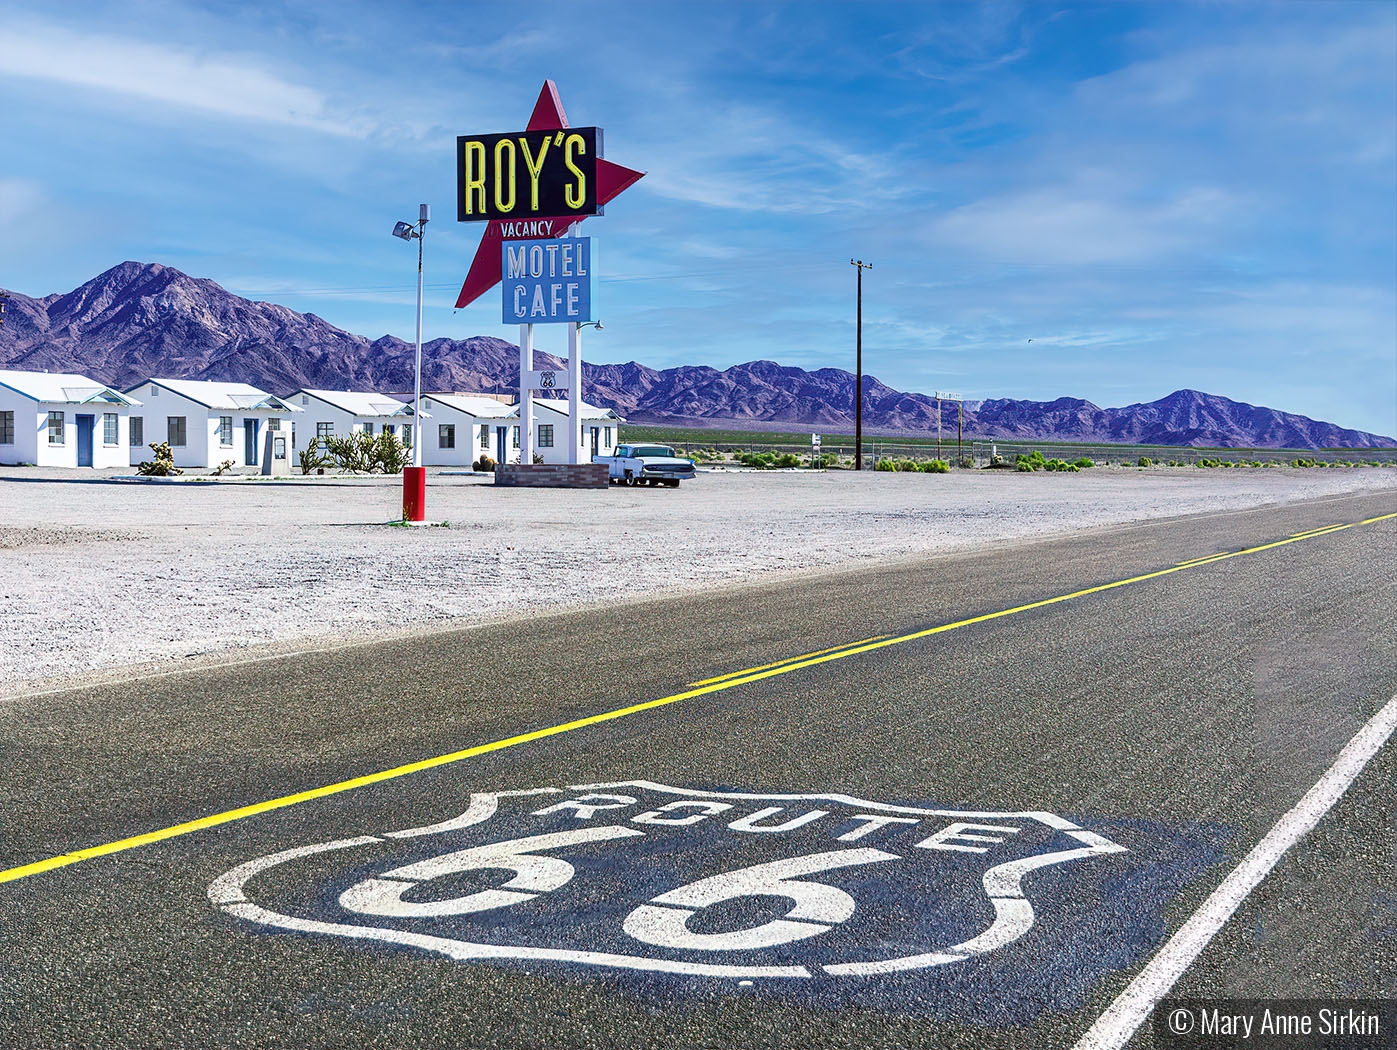 Get Your Kicks on Route 66 by Mary Anne Sirkin